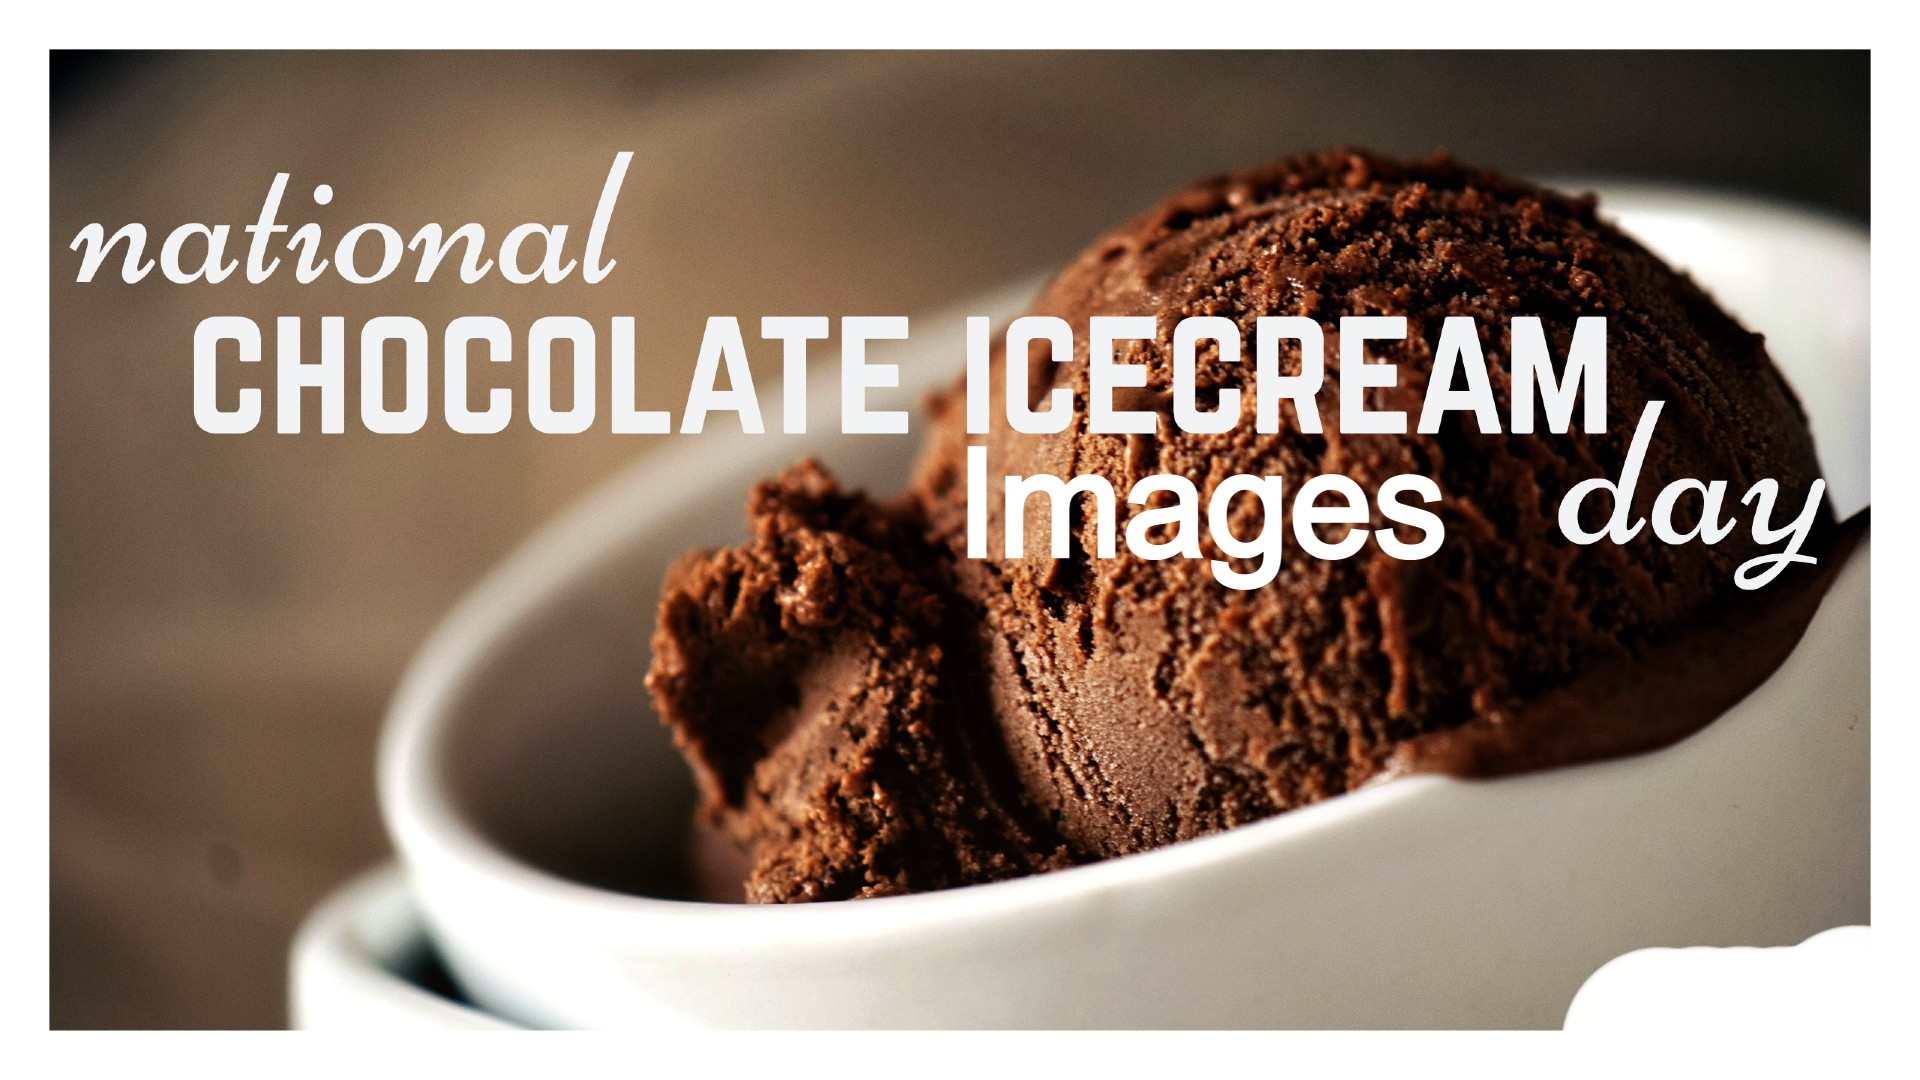 National Chocolate Ice Cream Day Images